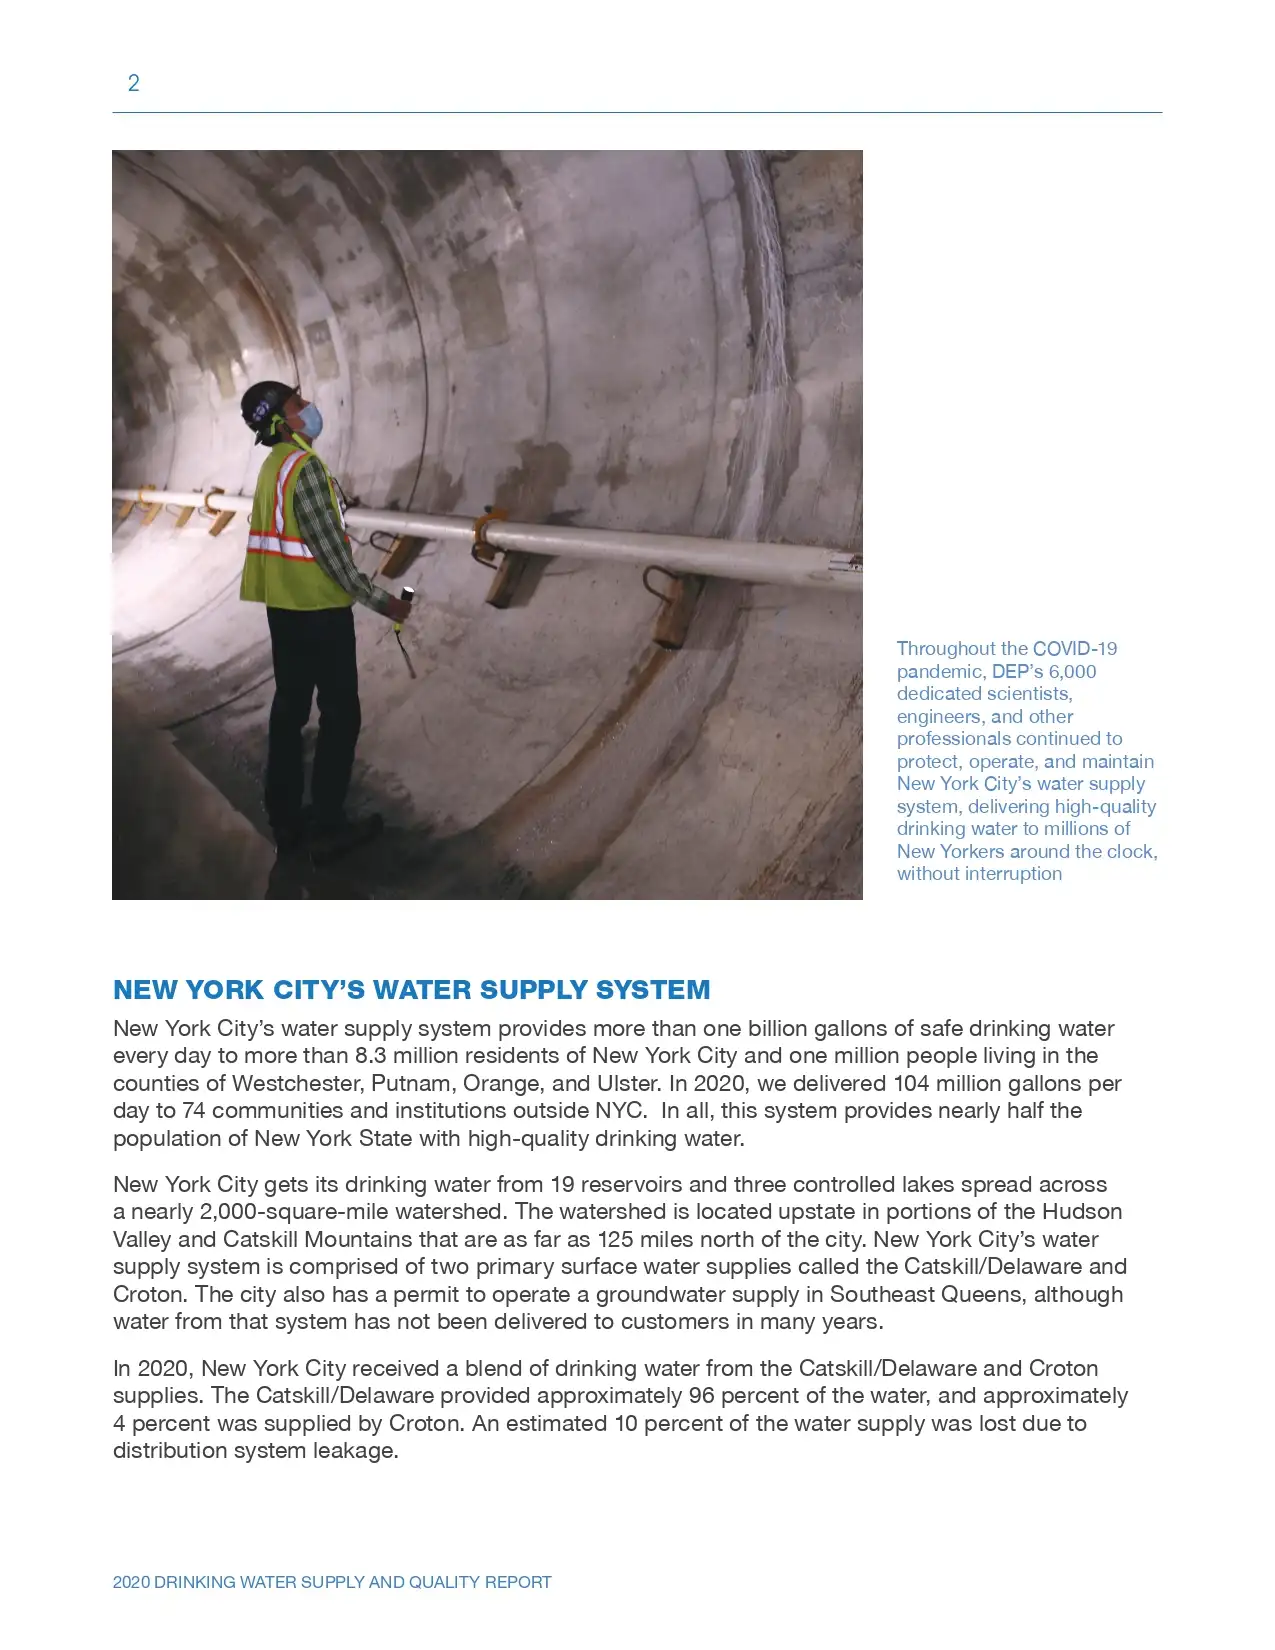 New York City Drinking Water Supply and Quality Report - 2020